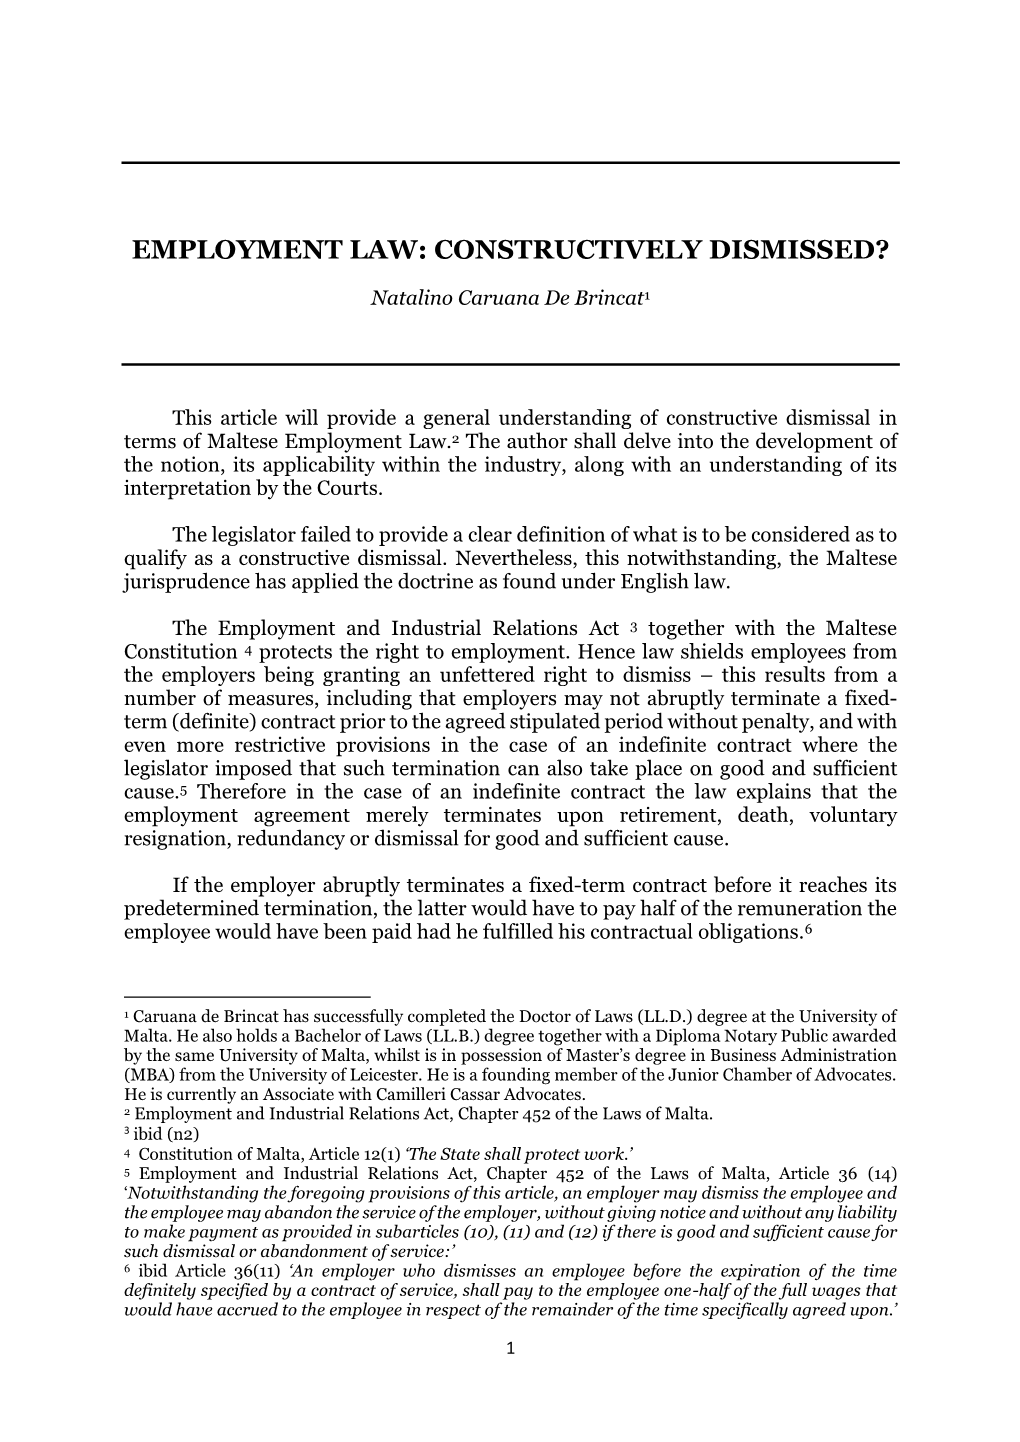 Employment Law: Constructively Dismissed?